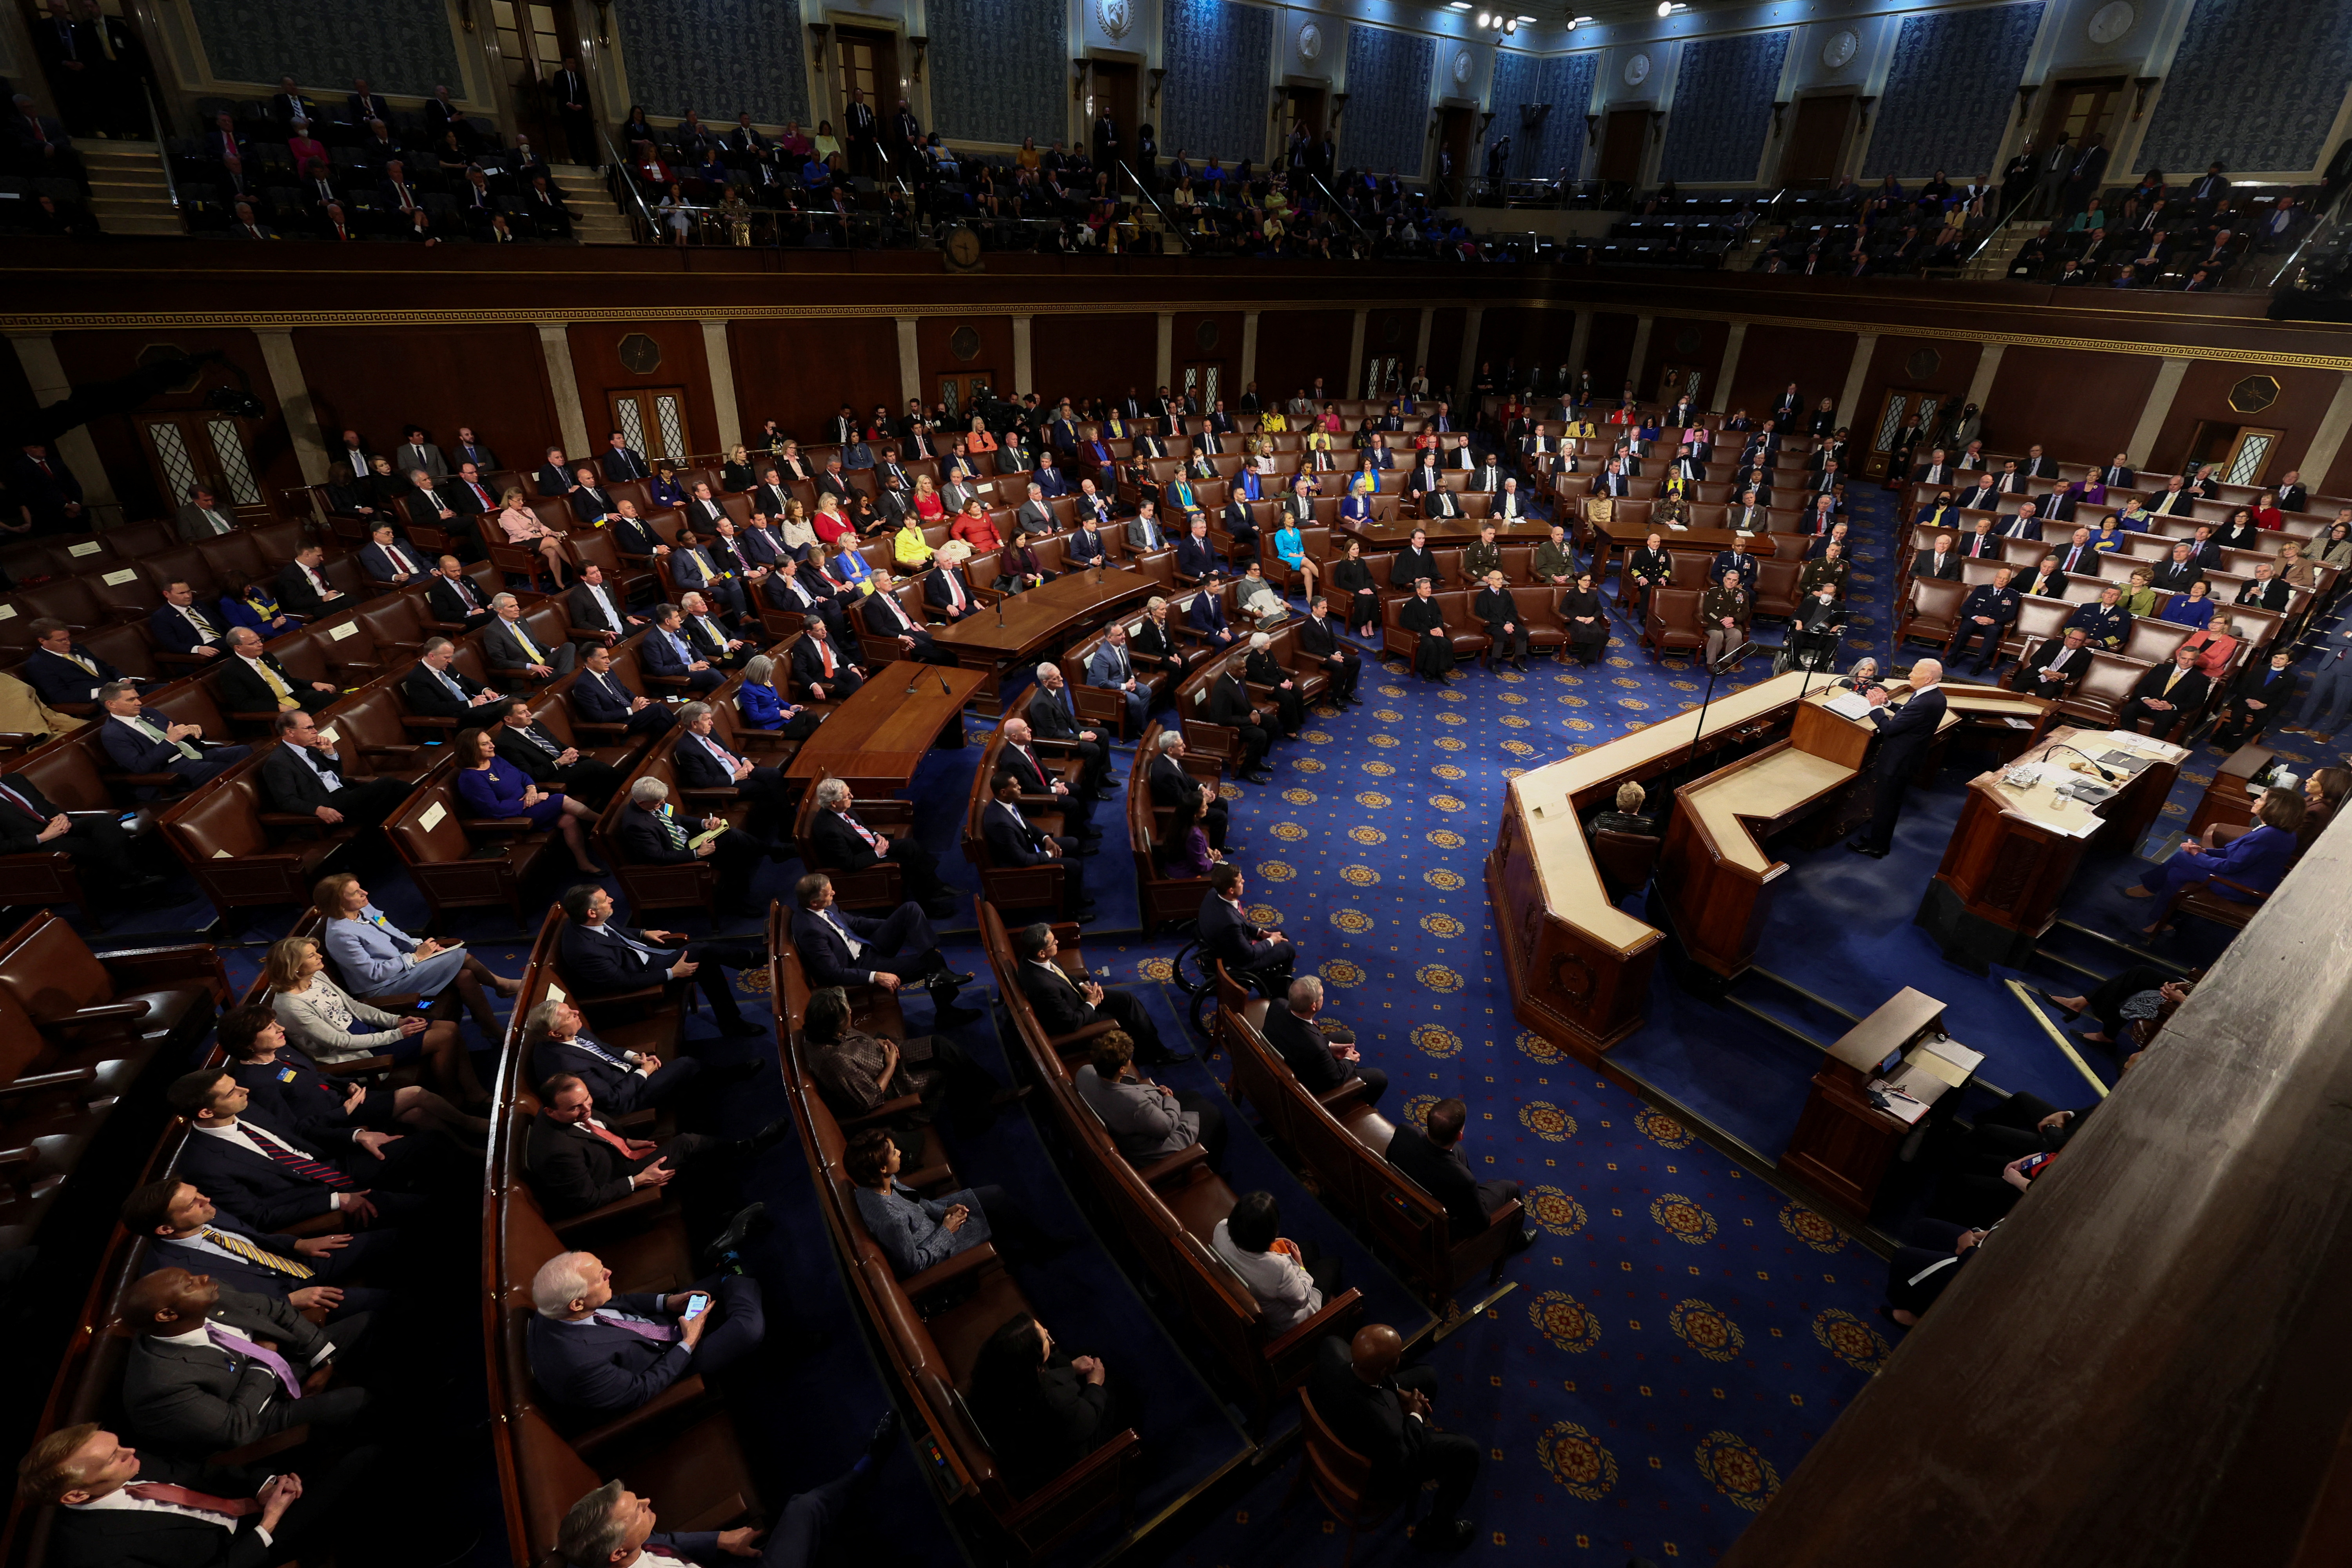 U.S. President Joe Biden delivers his State of the Union address to a joint session of Congress in Washington